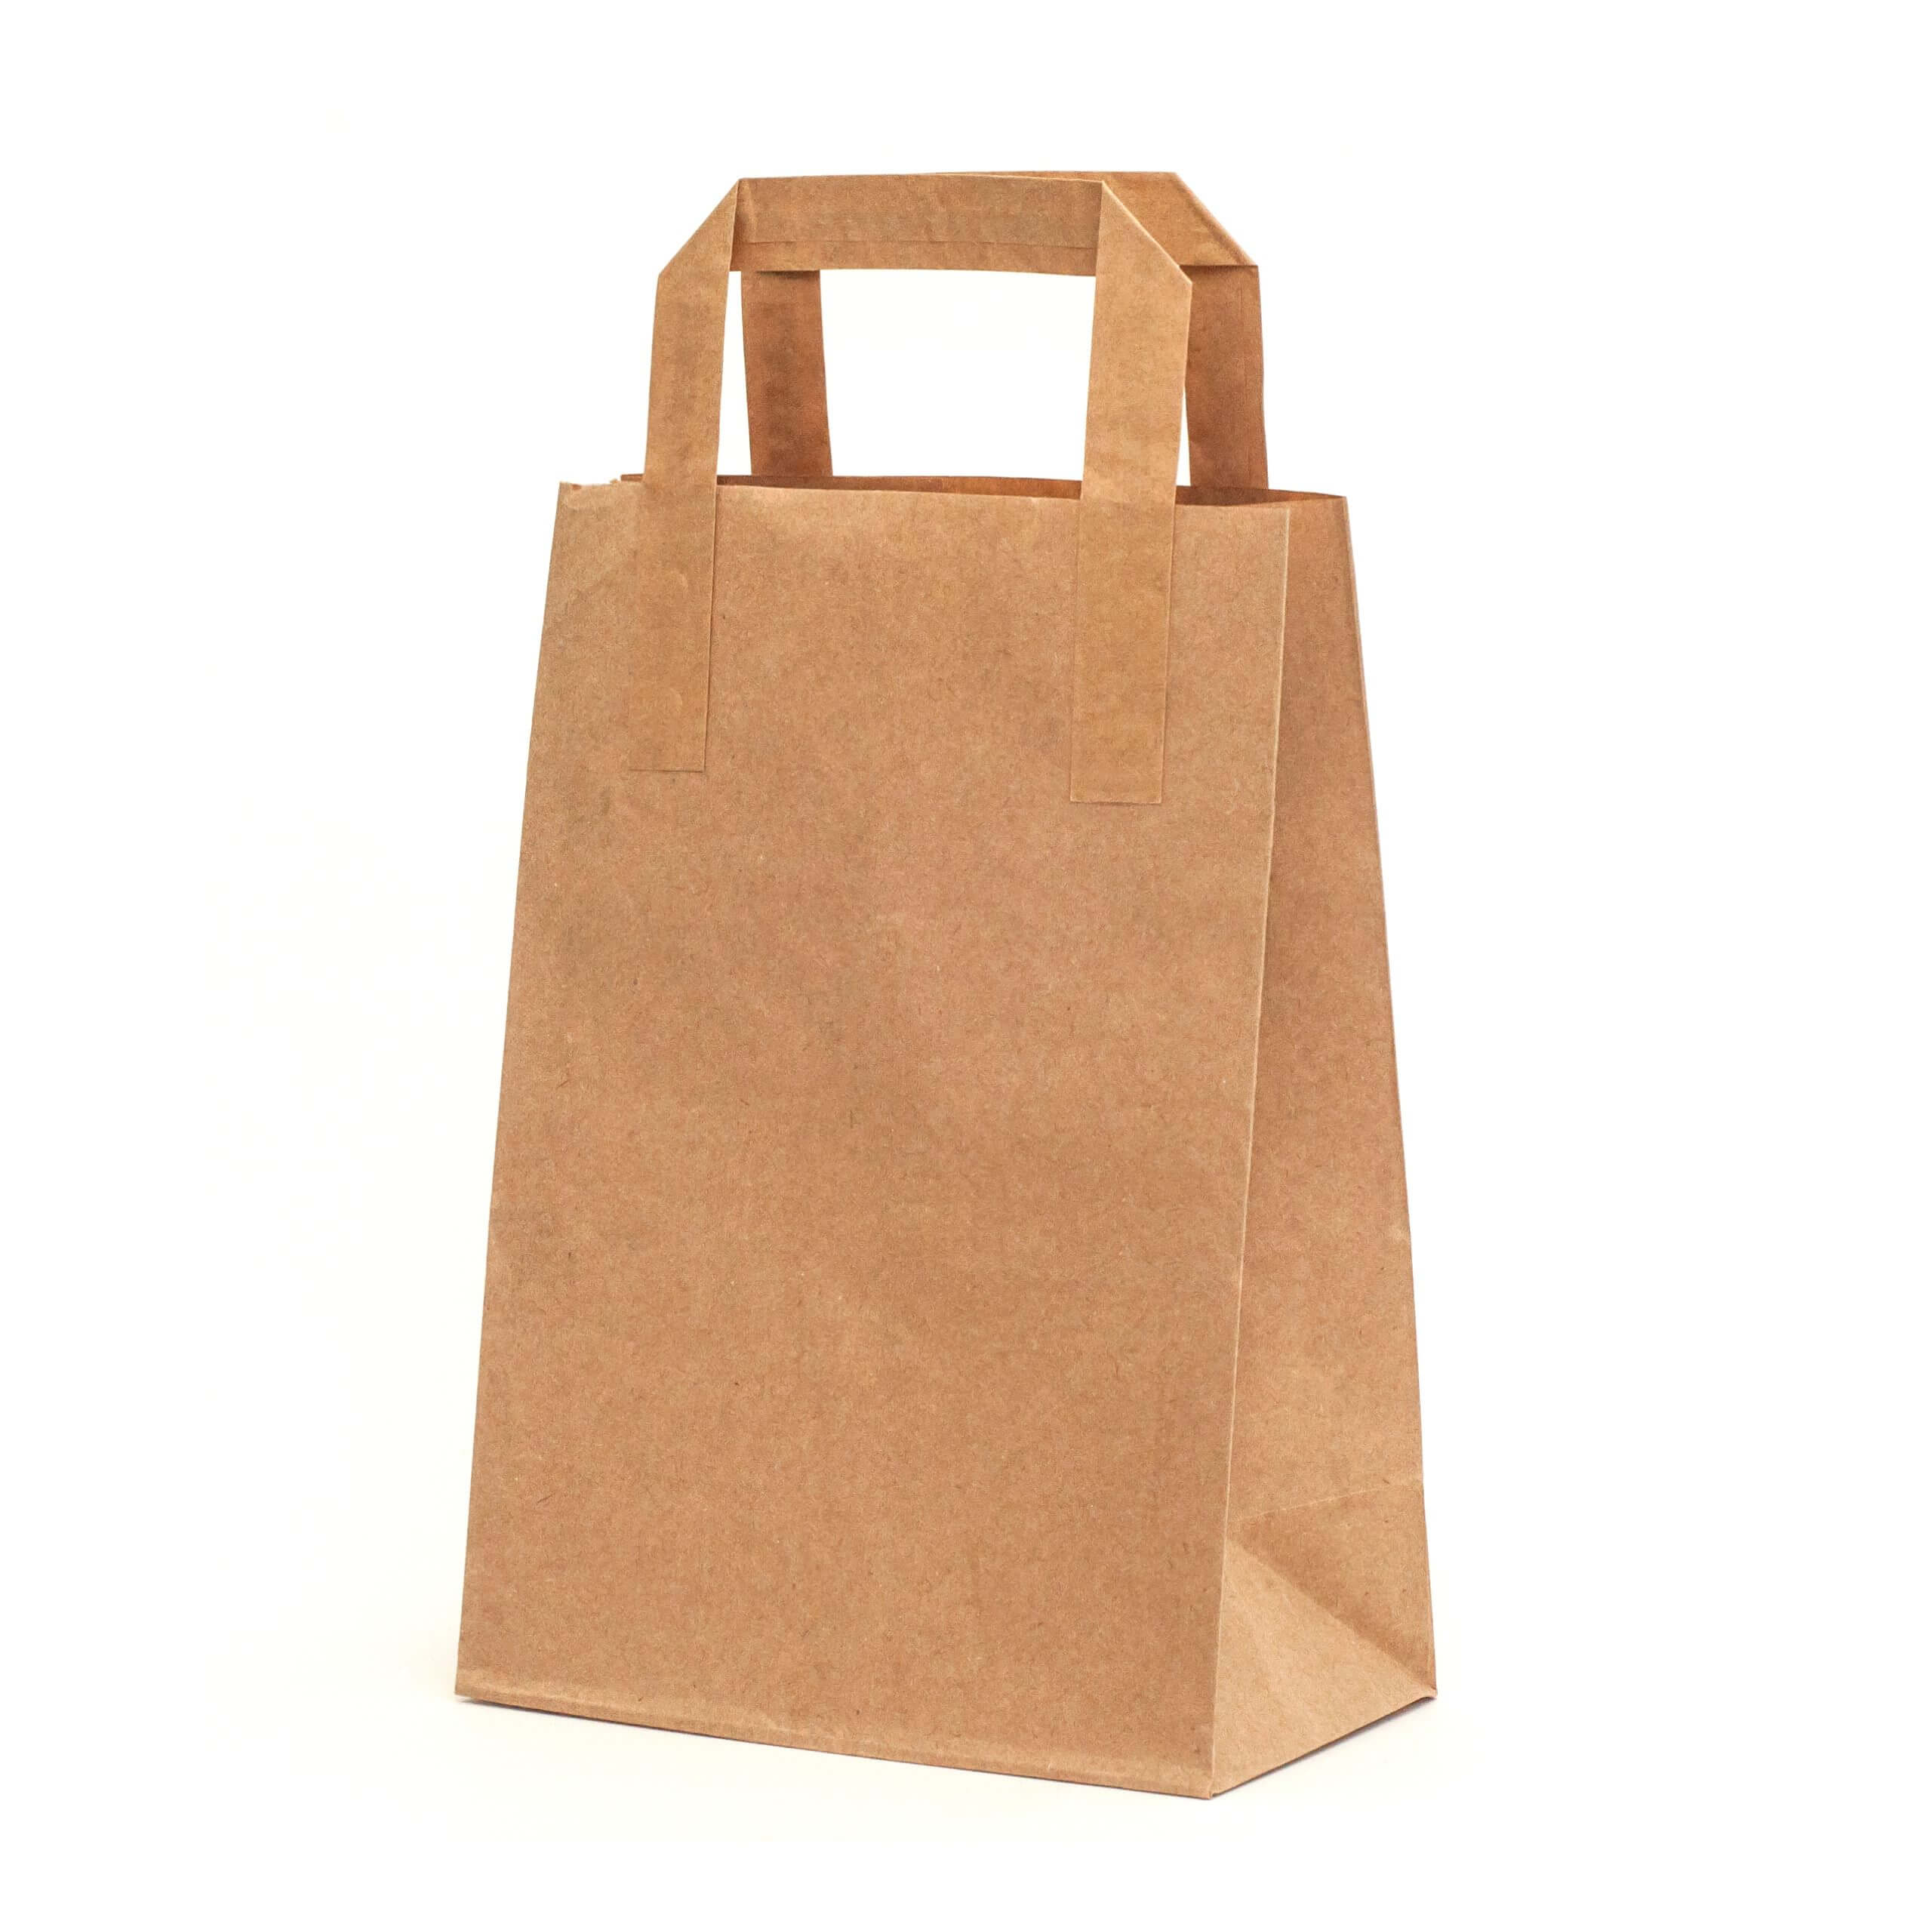 An image of one of our Block Bottom Paper Bags with a tape handle.